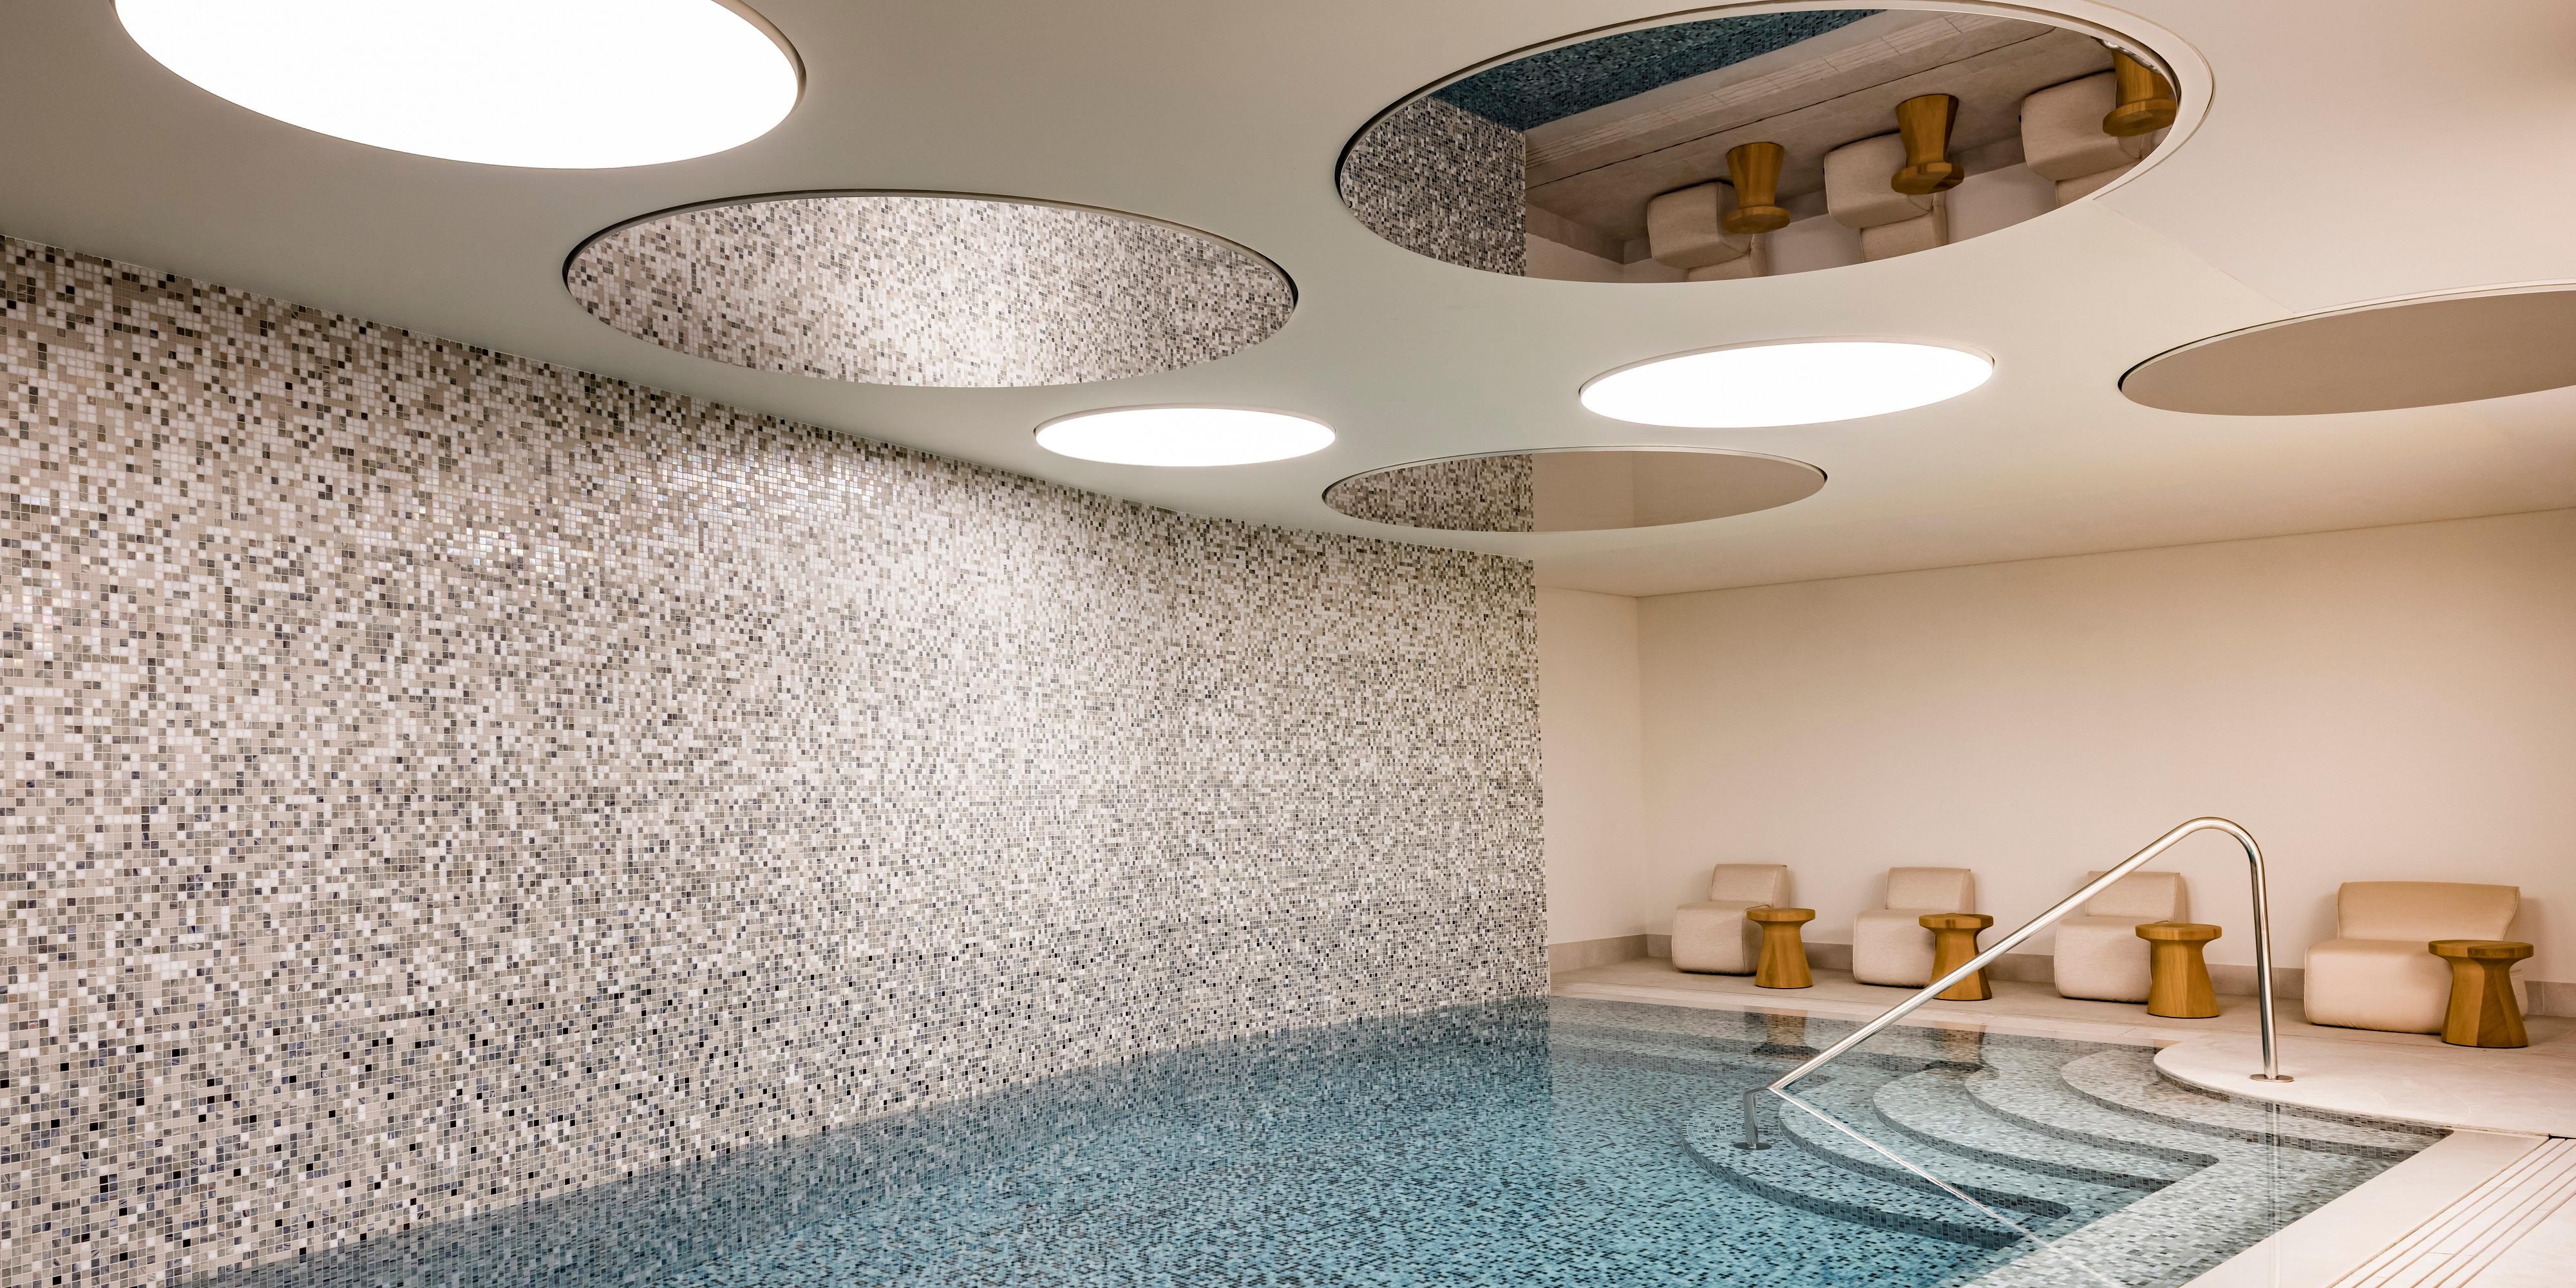 Wave goodbye to stress and indulge in our wellness and relaxation centre. Enjoy our Codage Spa, a boutique gymnasium, a sauna and steam room, two dedicated treatment rooms and an indoor pool.